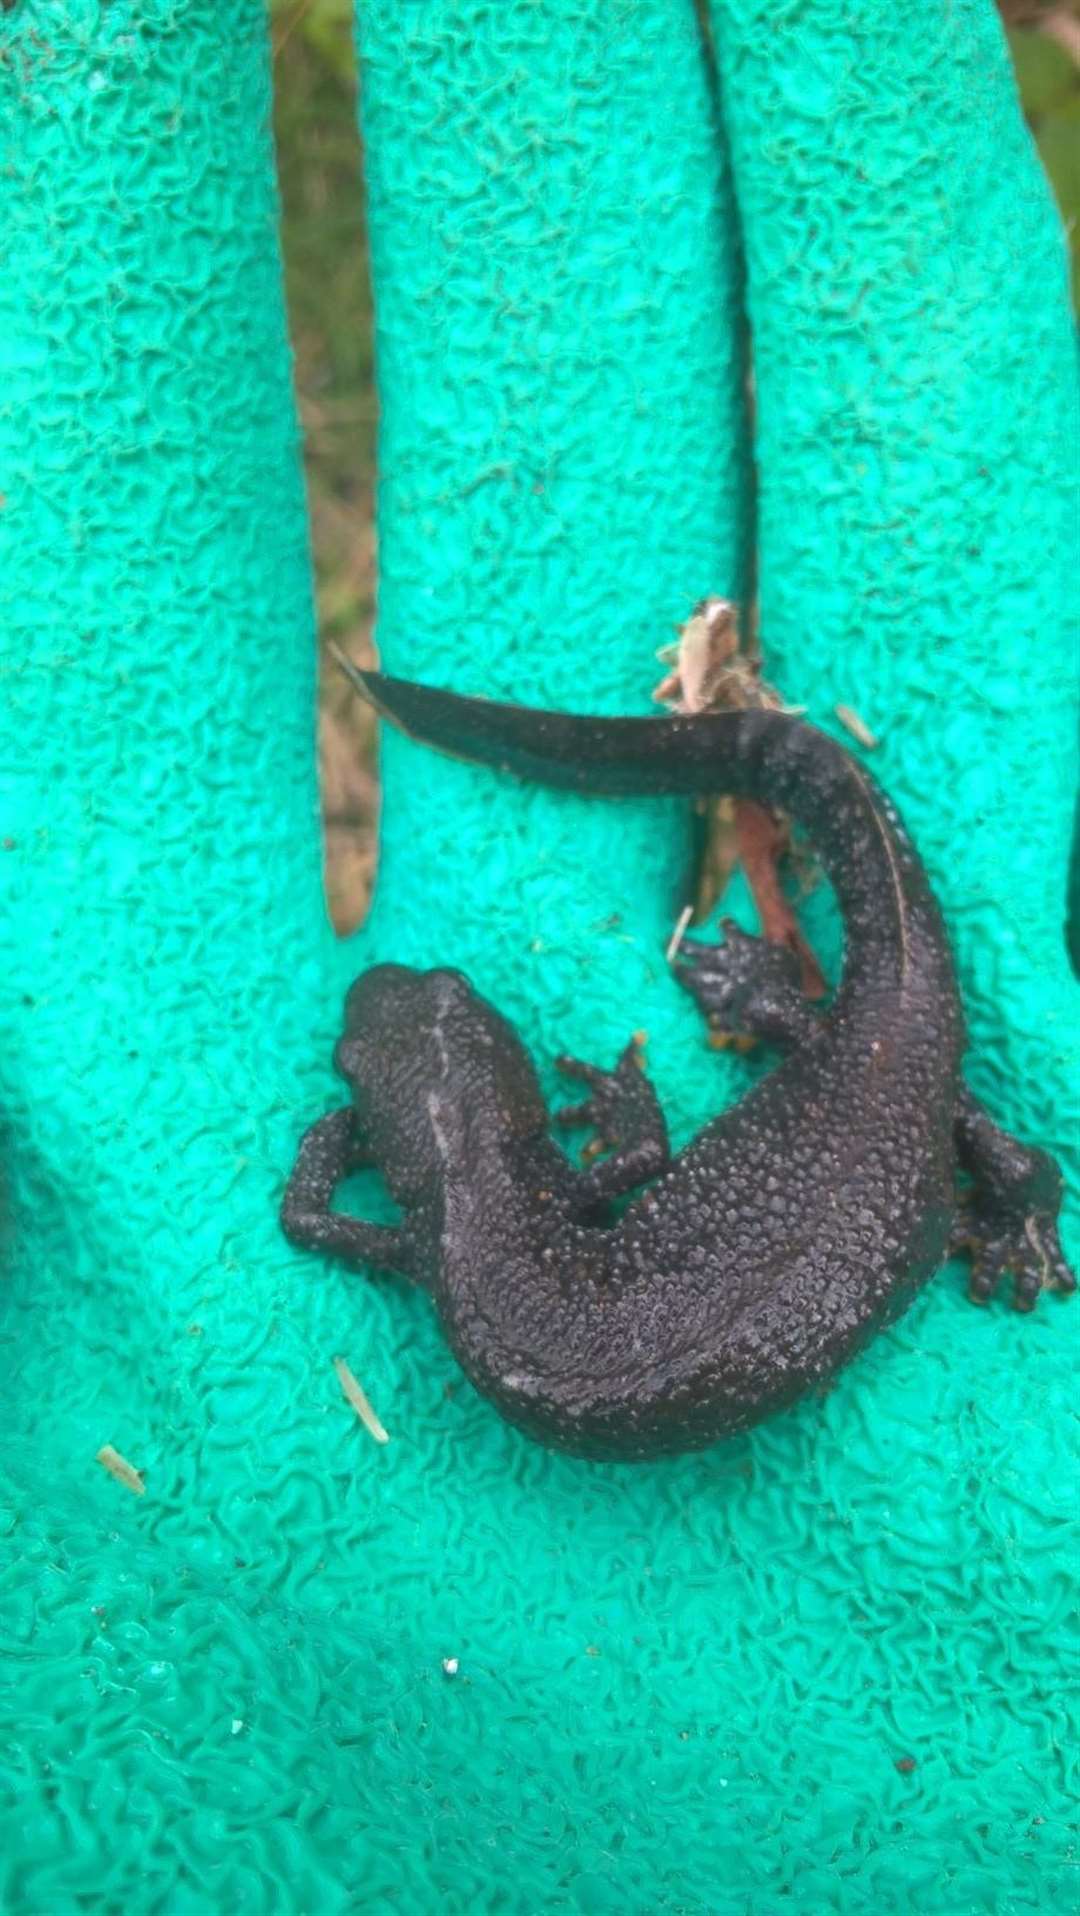 One of the newts found in Lydd (4018694)